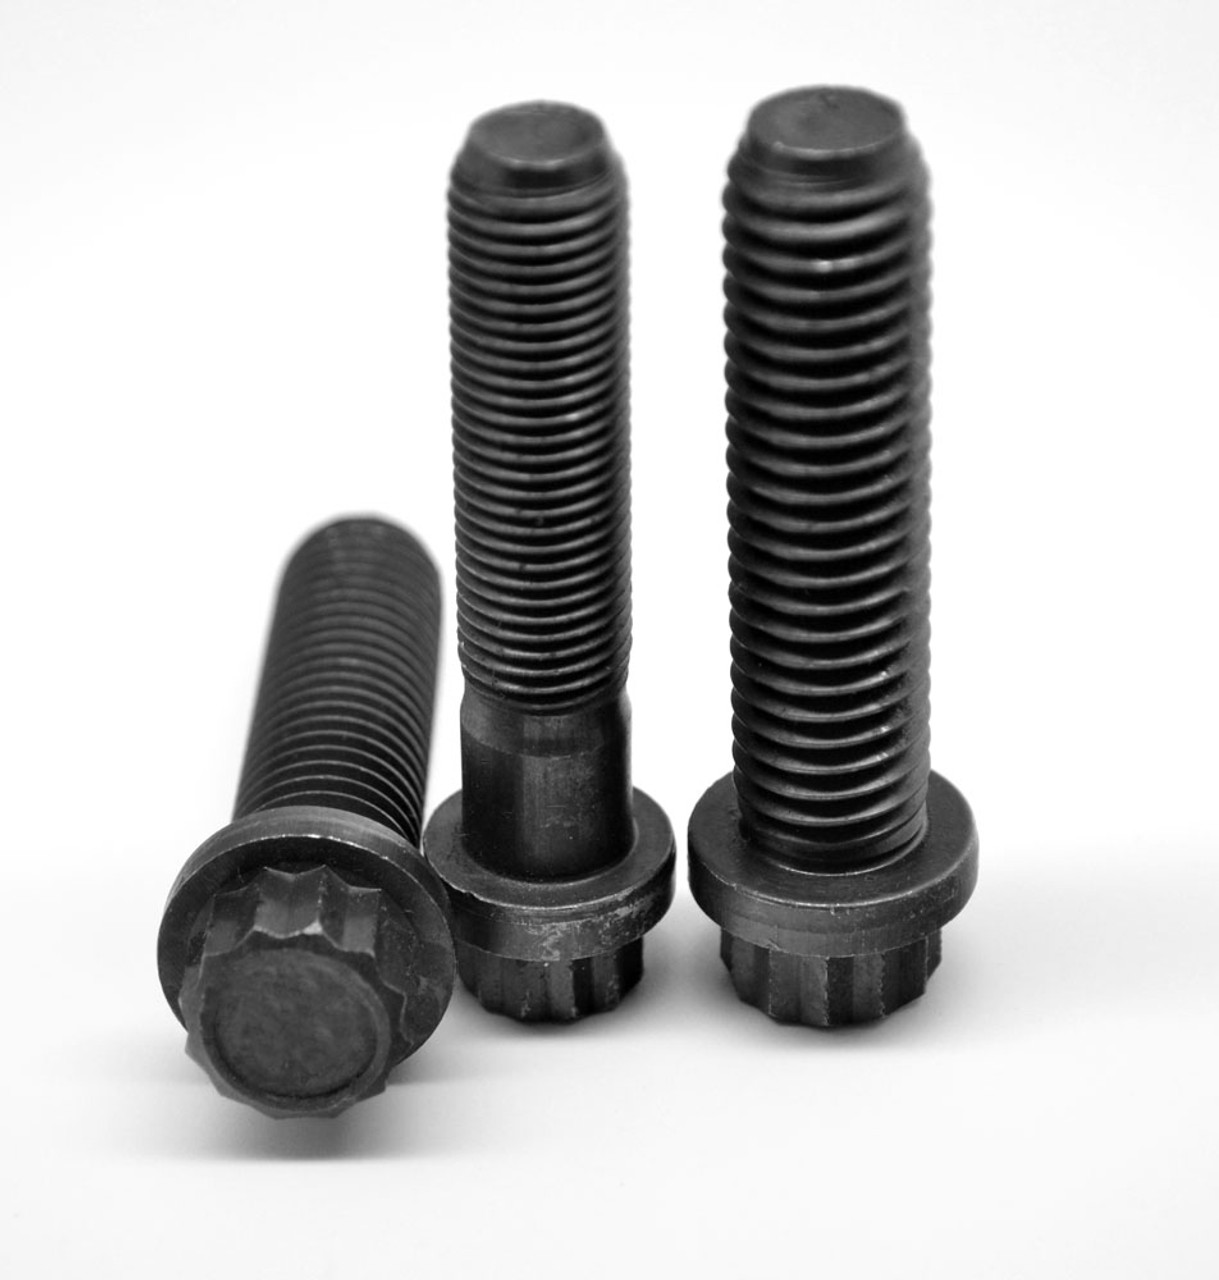 3/4-10 x 4 Coarse Thread 12-Point Flange Screw Alloy Steel Thermal Black Oxide